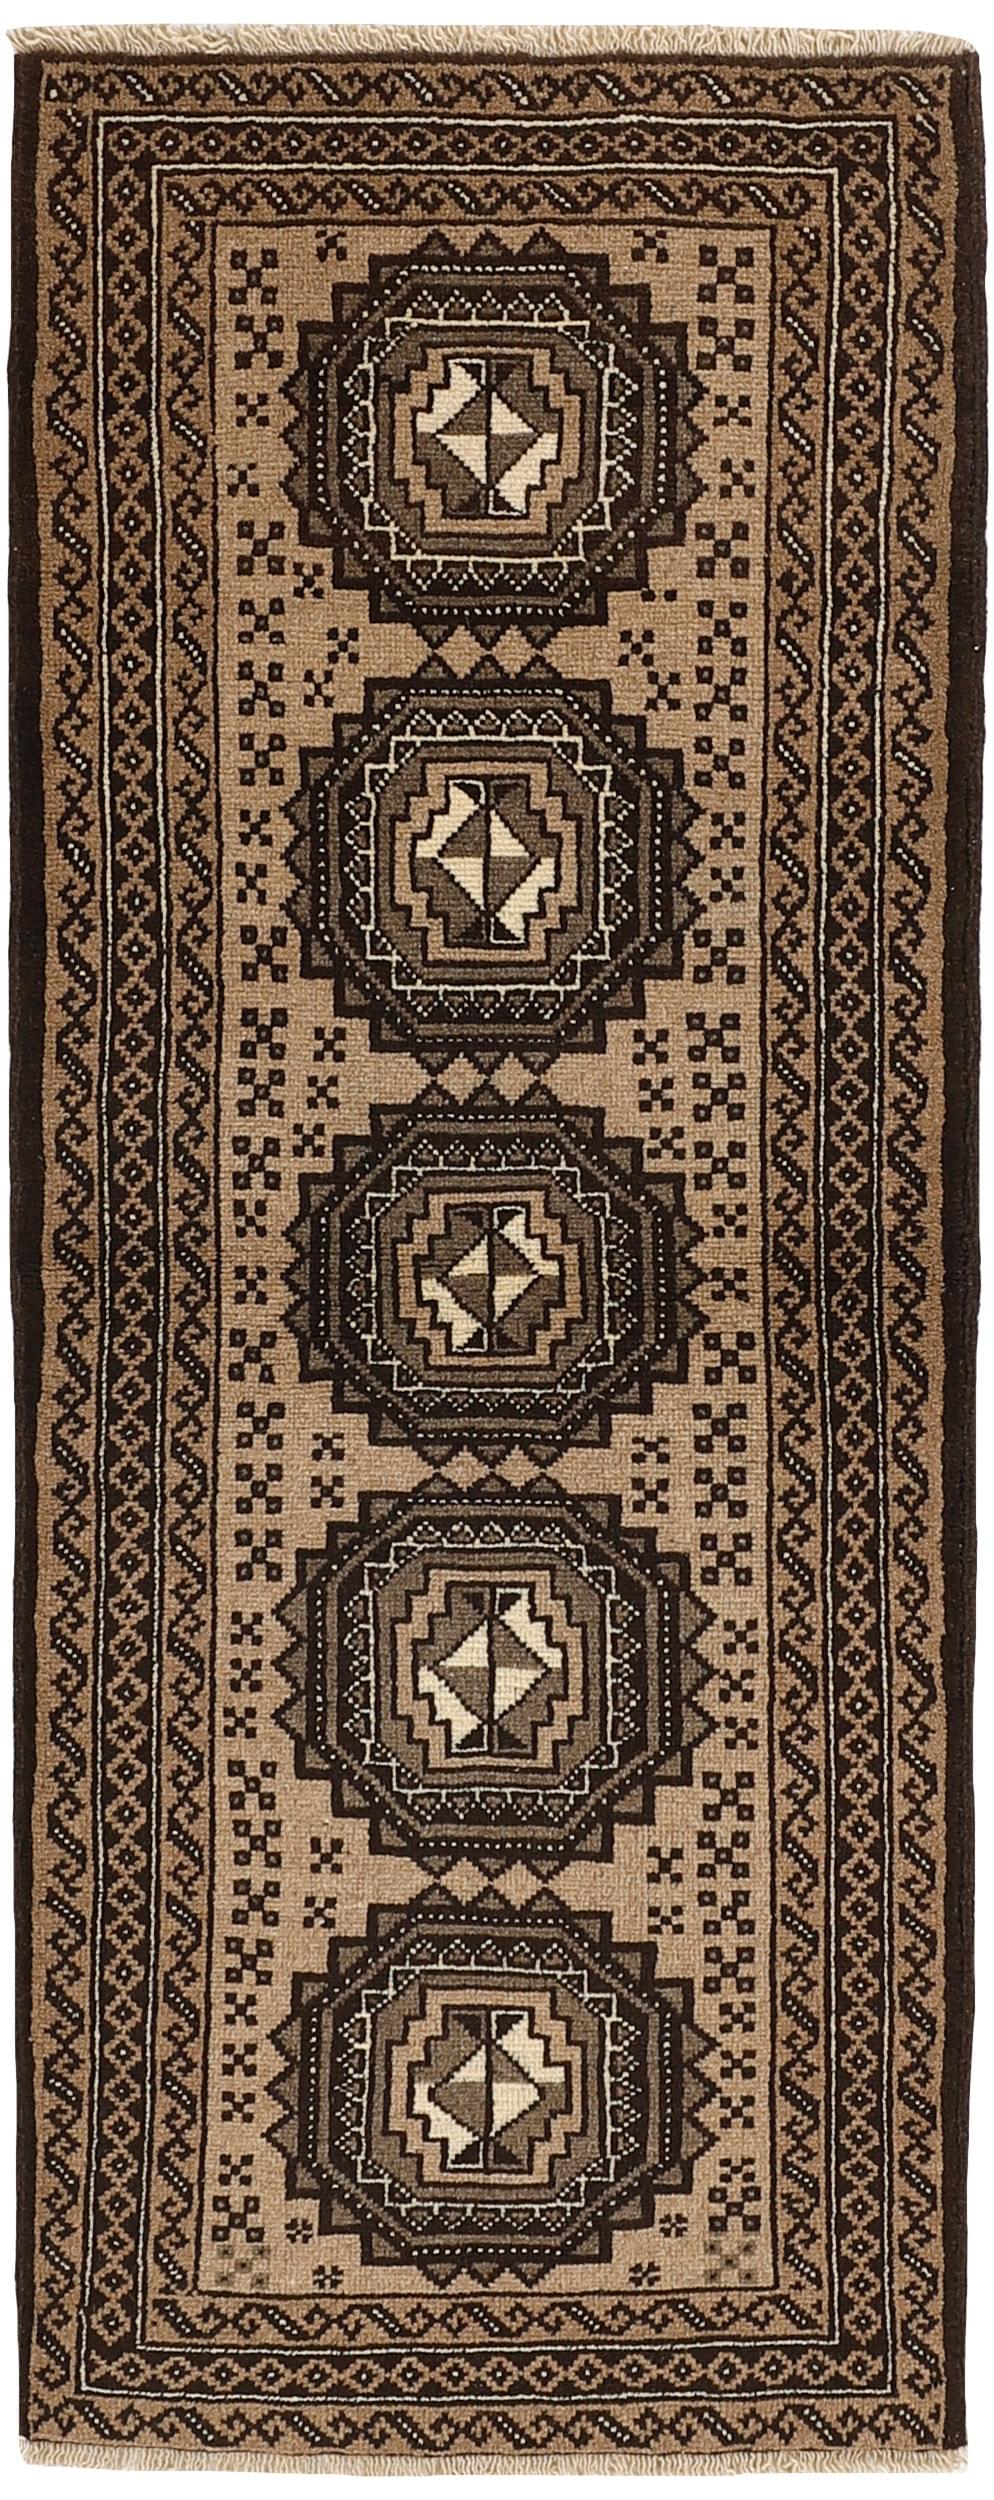 Brown Persian wool rug with traditional design